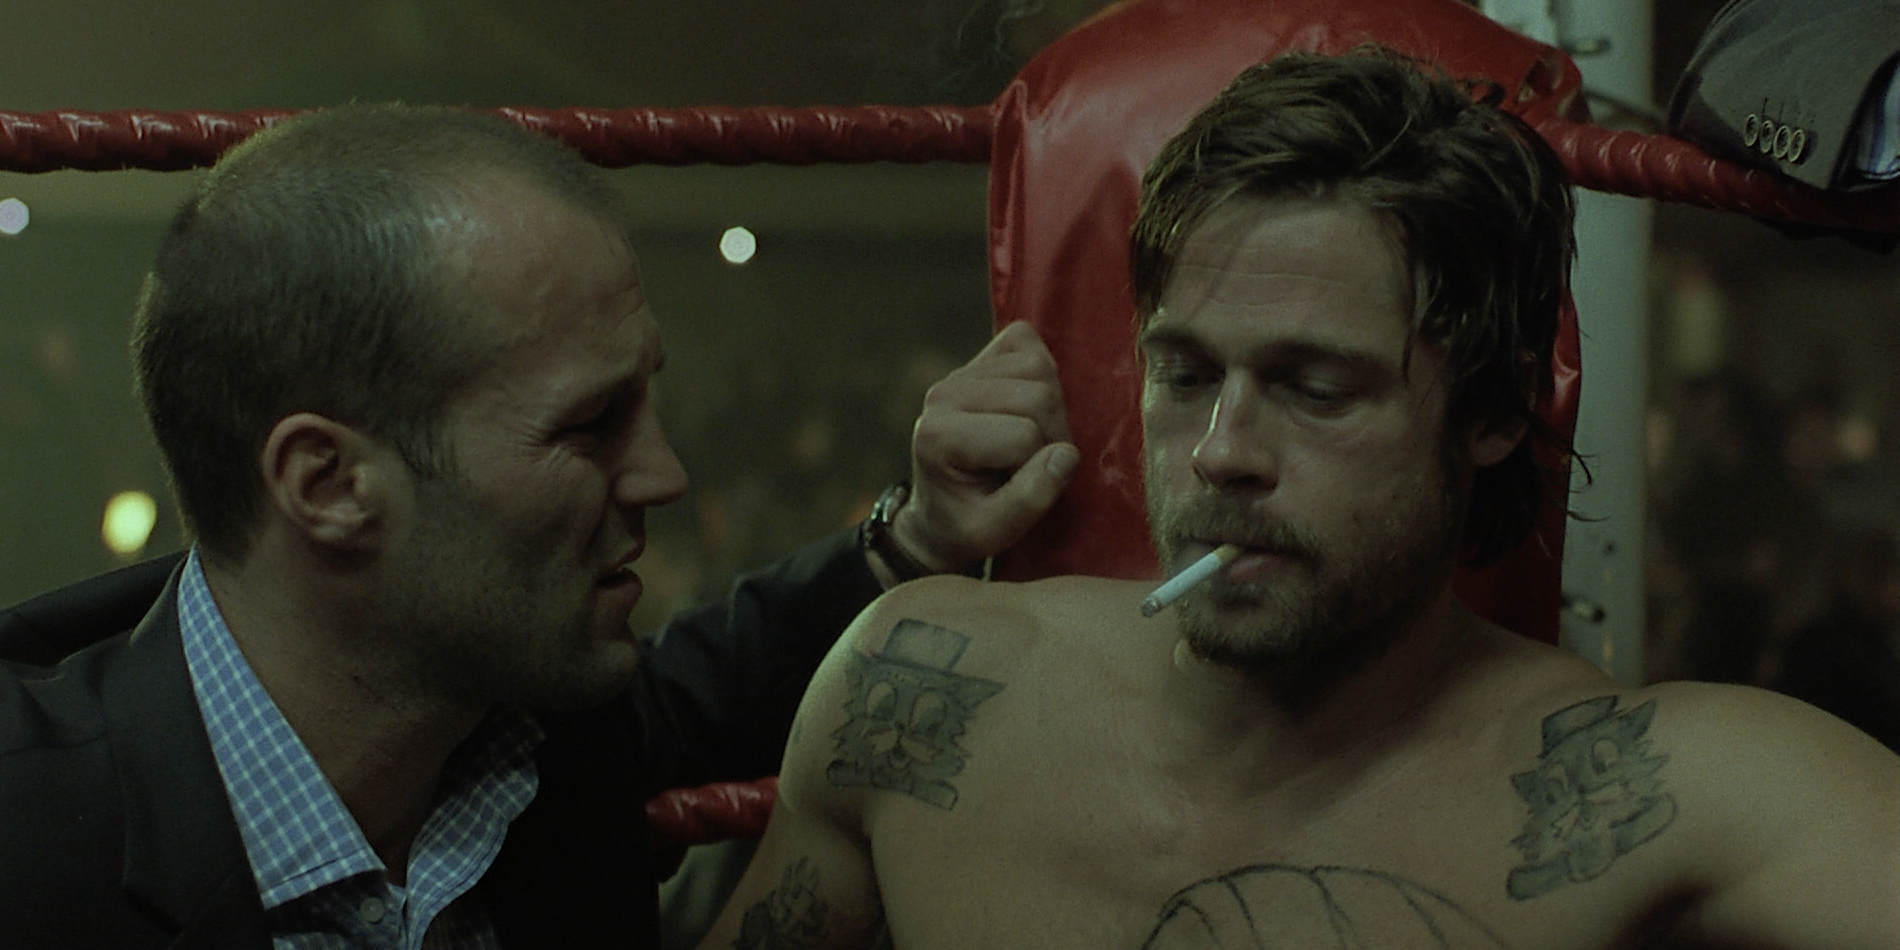 Turkish and Mickey in the boxing ring in Snatch